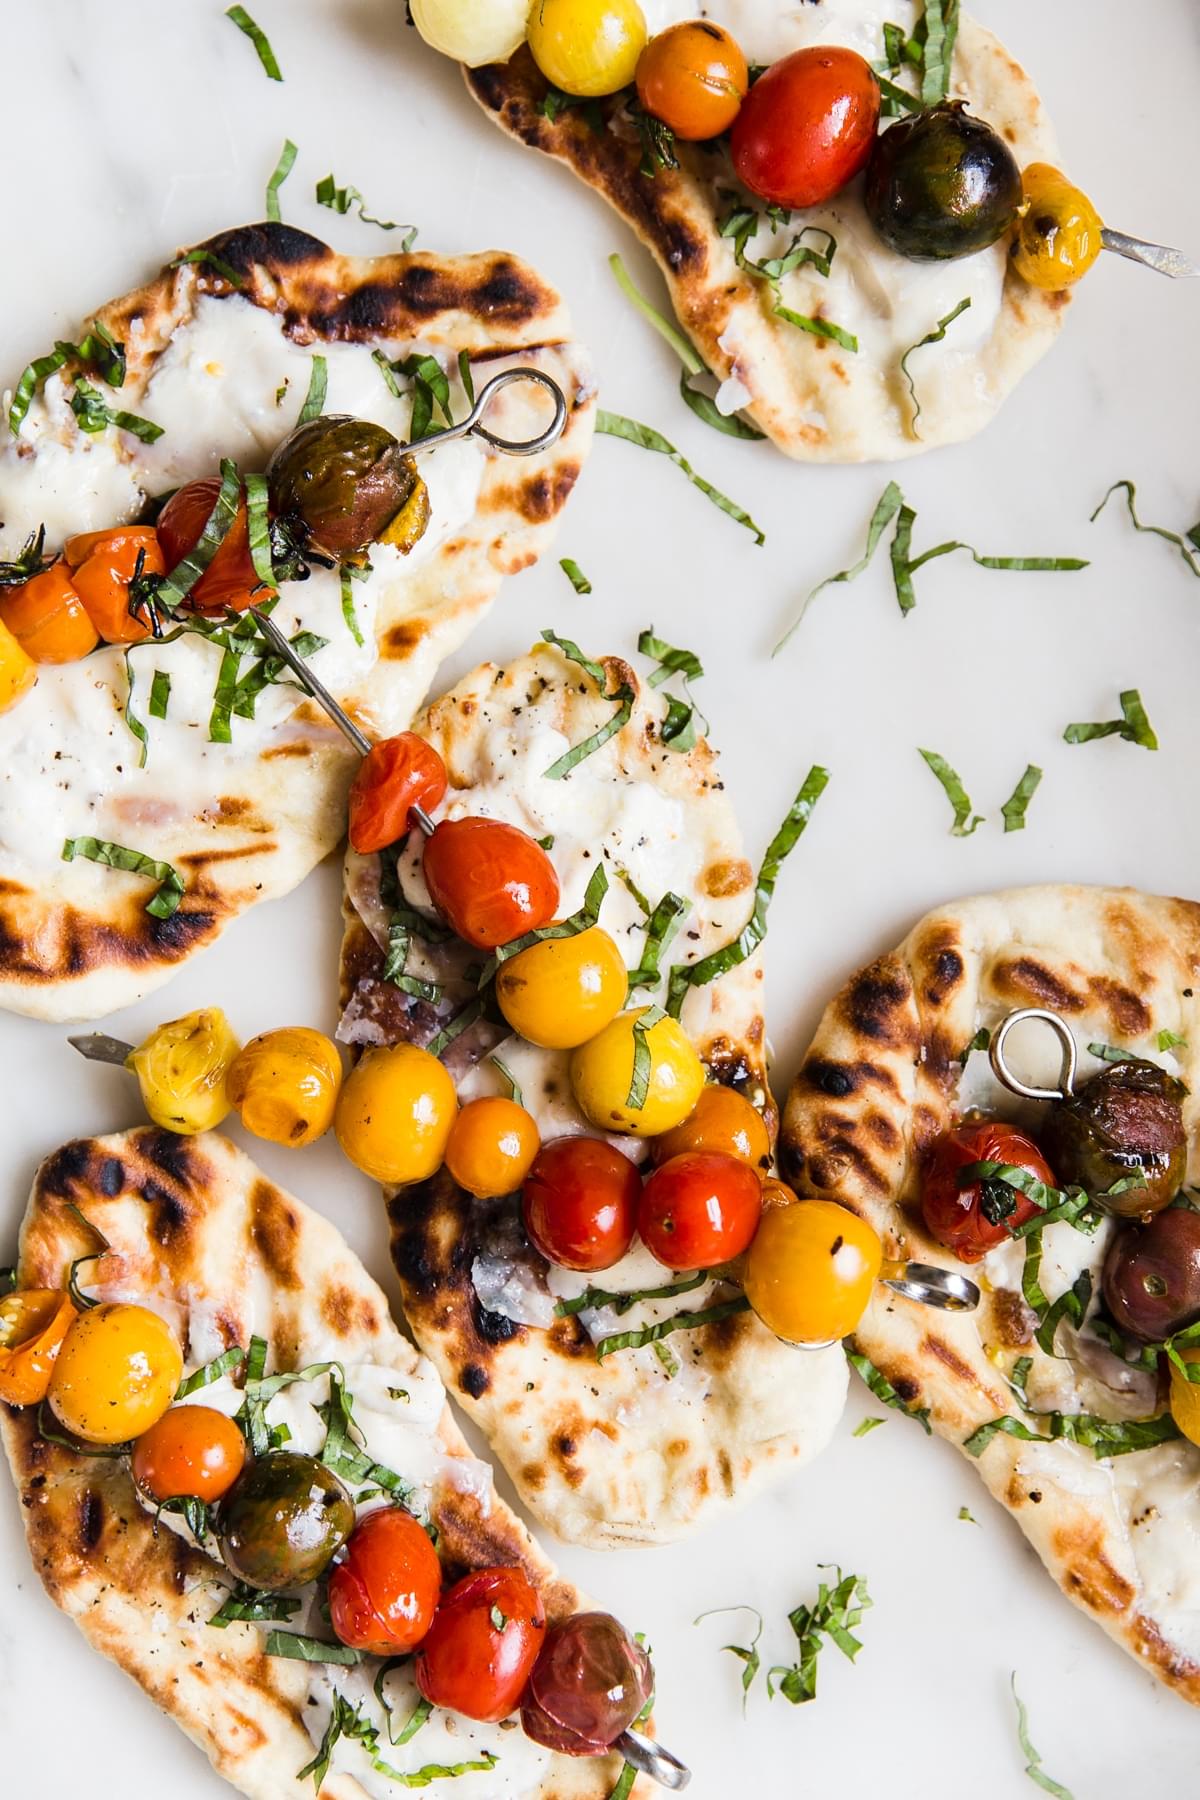 Grilled Burrata Flat Bread With Cherry Tomatoes